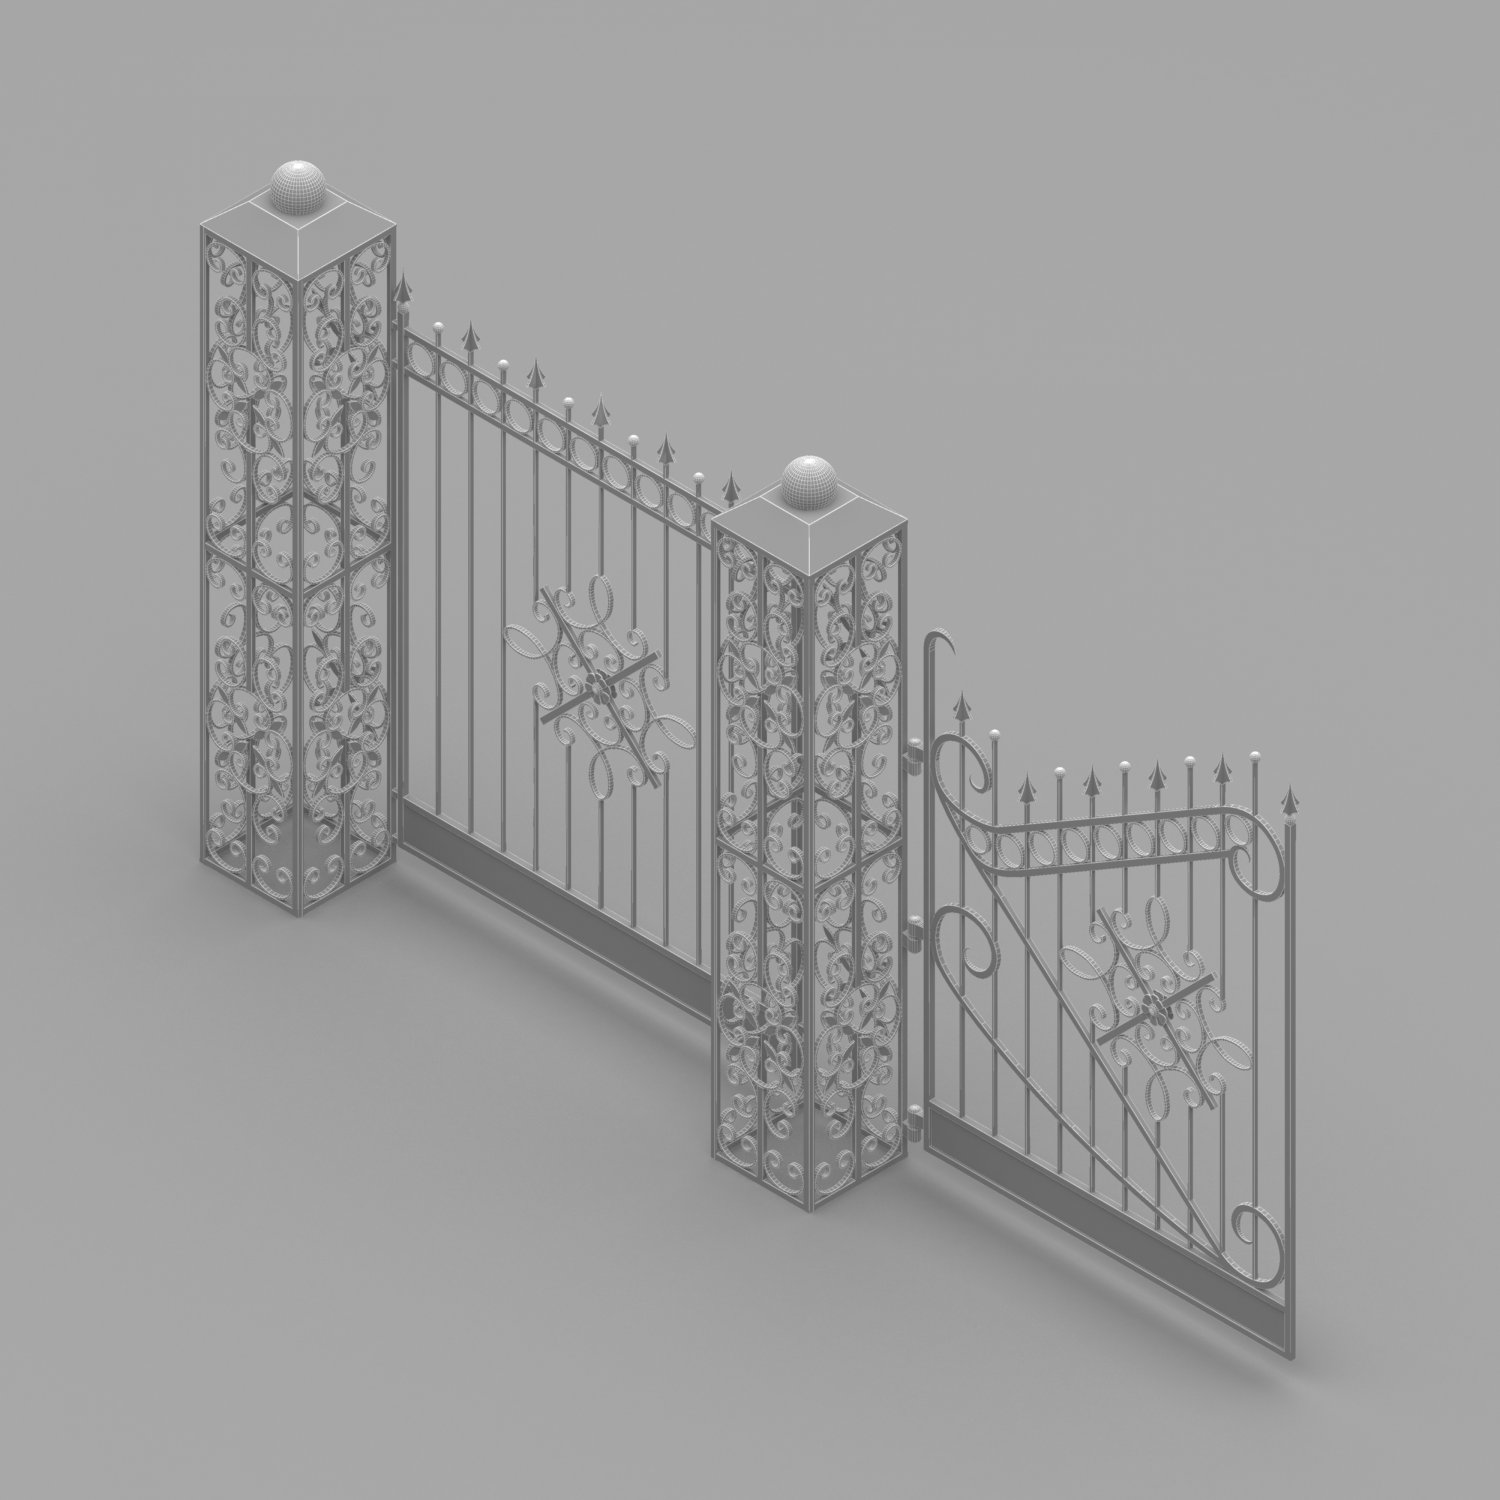 Fence Collection - 43 Items 3D Models in Environment 3DExport